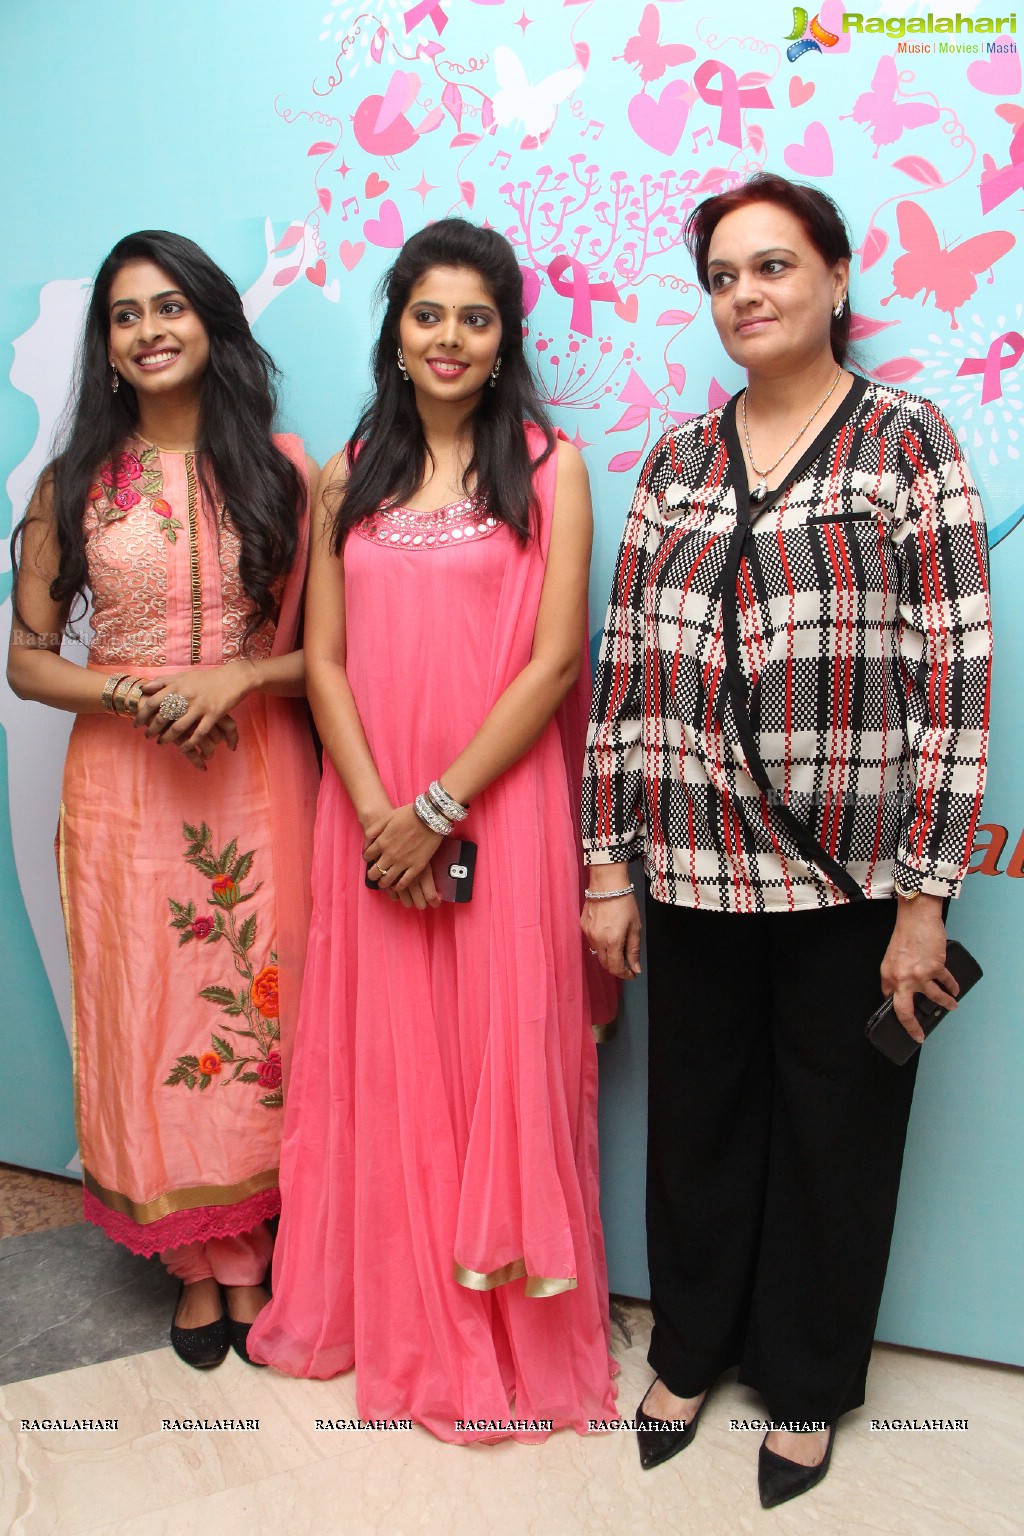 Breast Cancer Awareness Program by Omega Hospitals at Inorbit Mall, Hyderabad